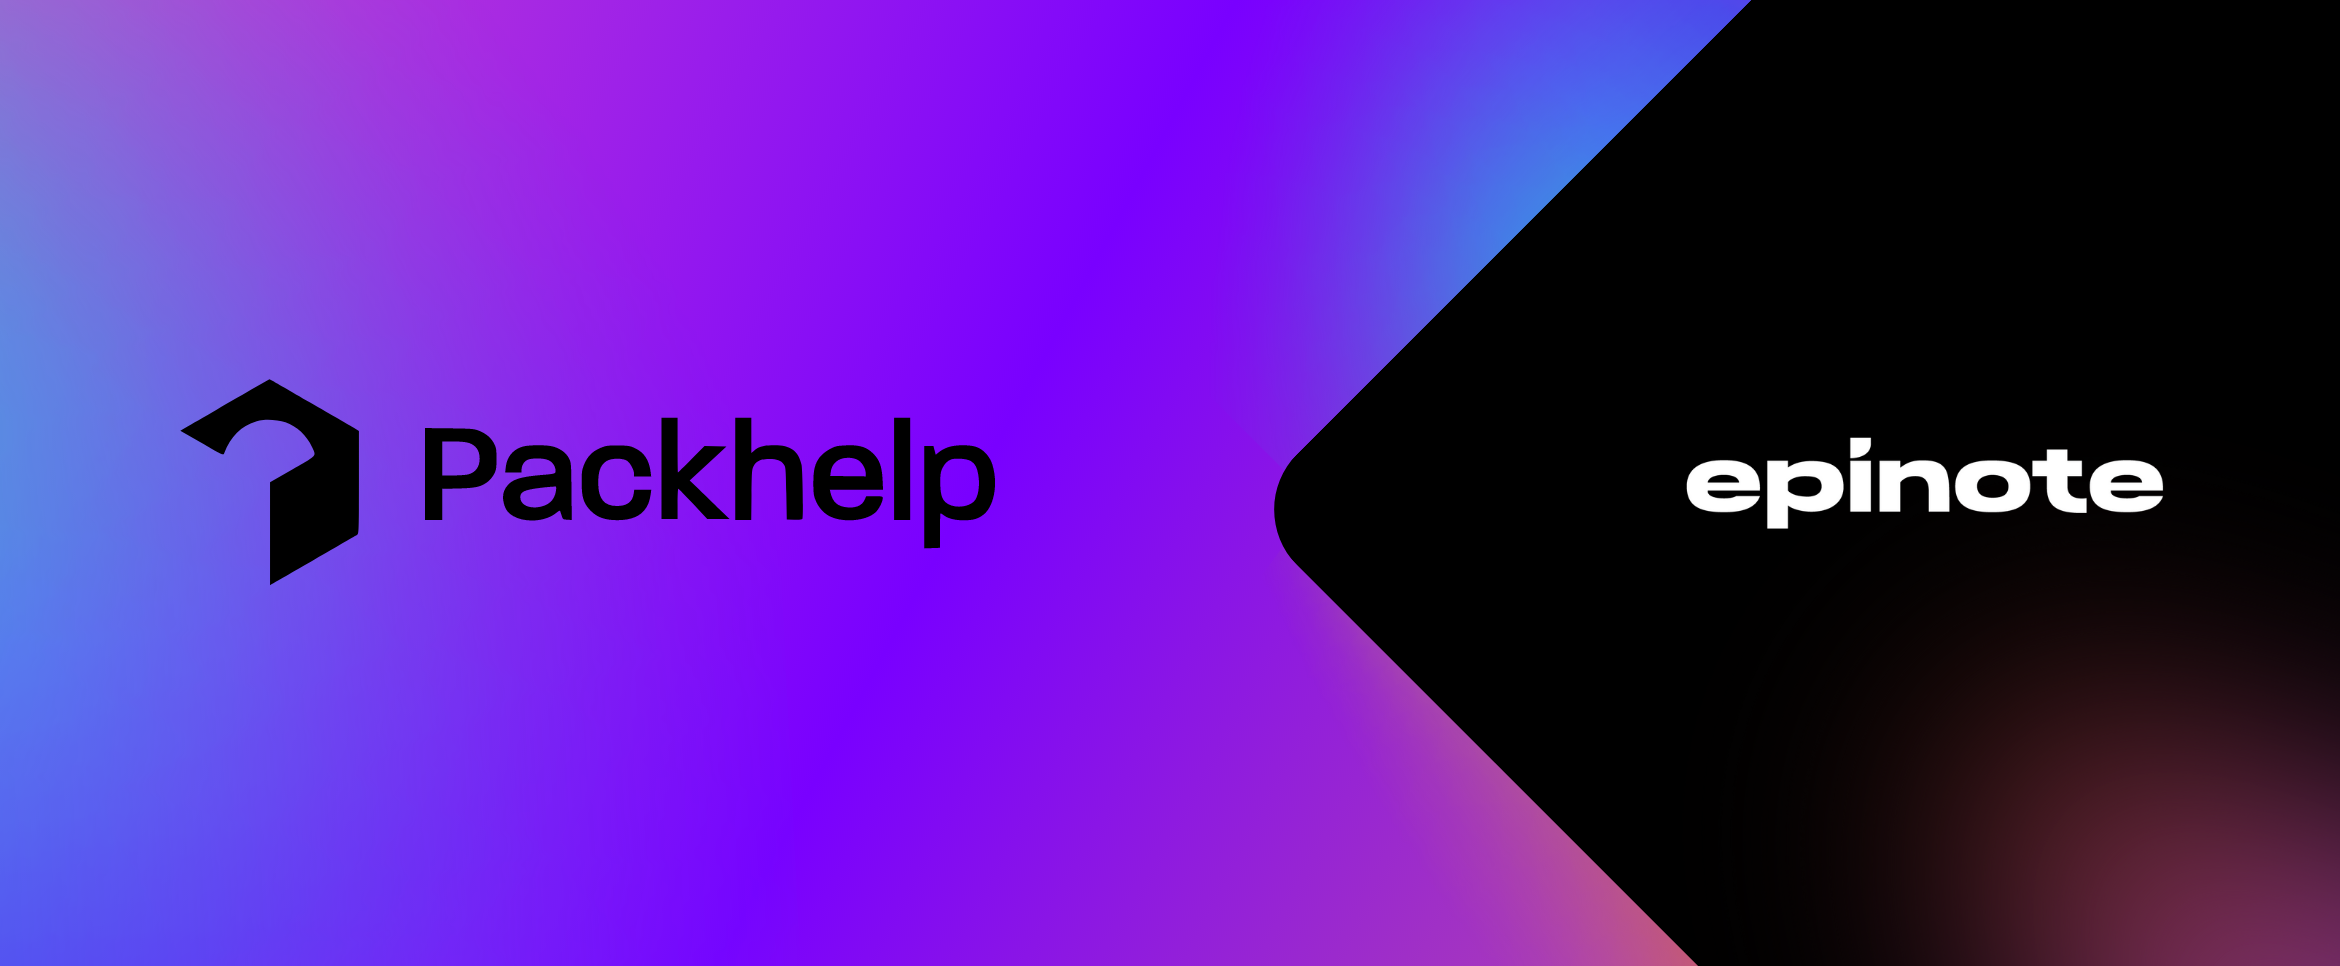 A banner showing two logotypes - Packhelp and Epinote. Packhelp's logotype is black and on the left, put on a gradient background (in pink, blue, purple). The Epinote logotype is white and placed on a black background with a slight highlight in pink in bottom-right corner.